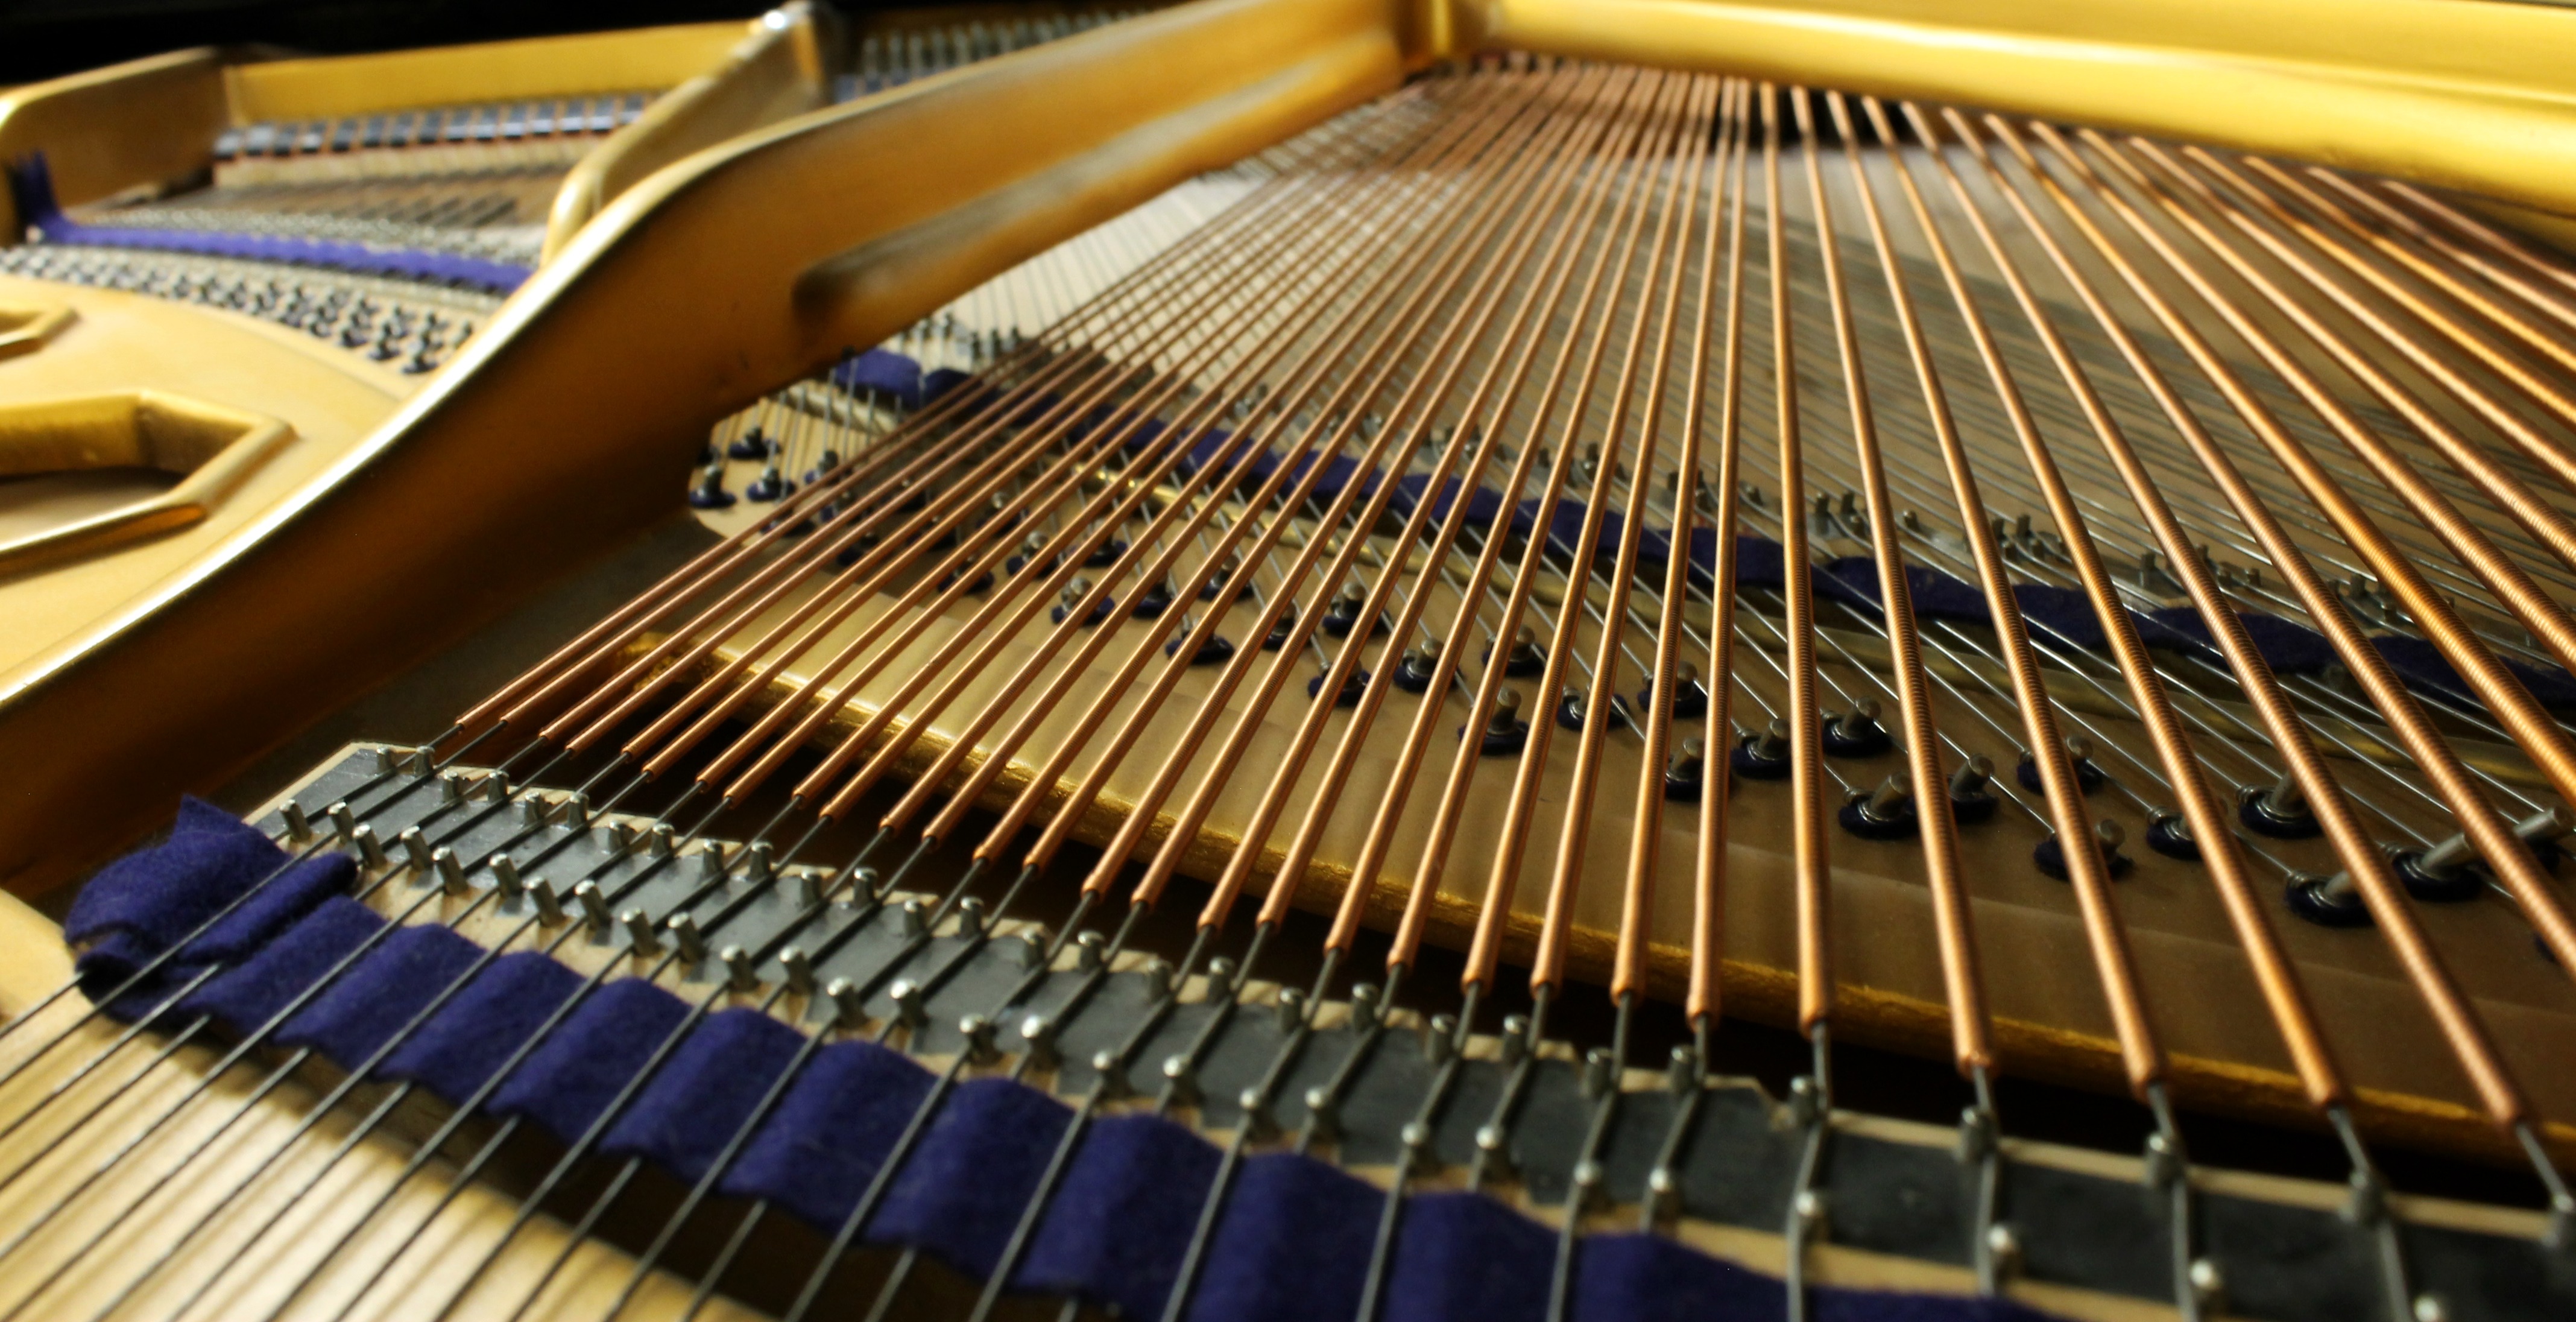 strings inside a piano